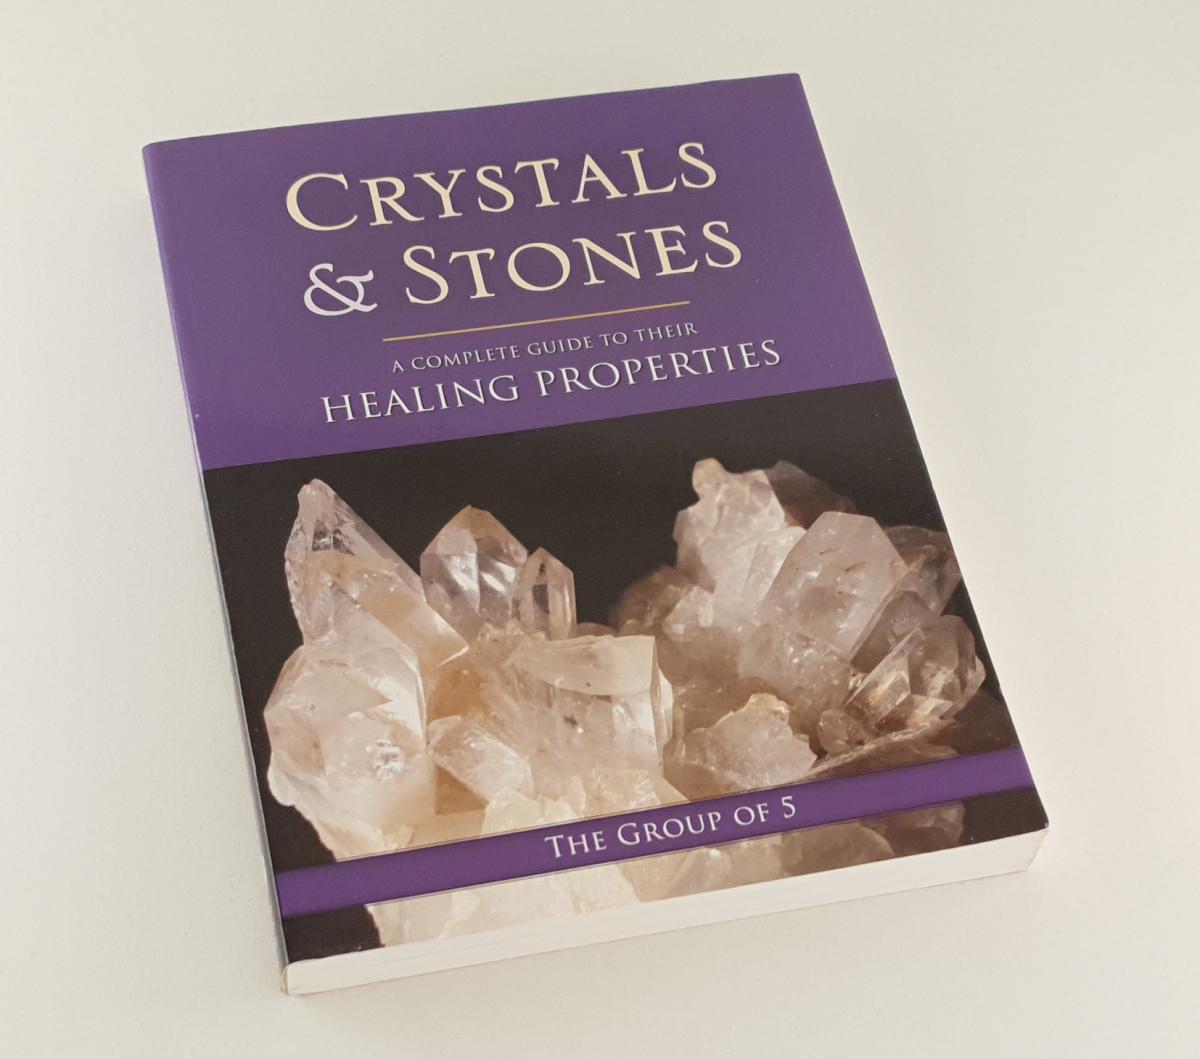 The Group of 5 - Crystals and Stones / A Complete Guide to Their Healing Properties